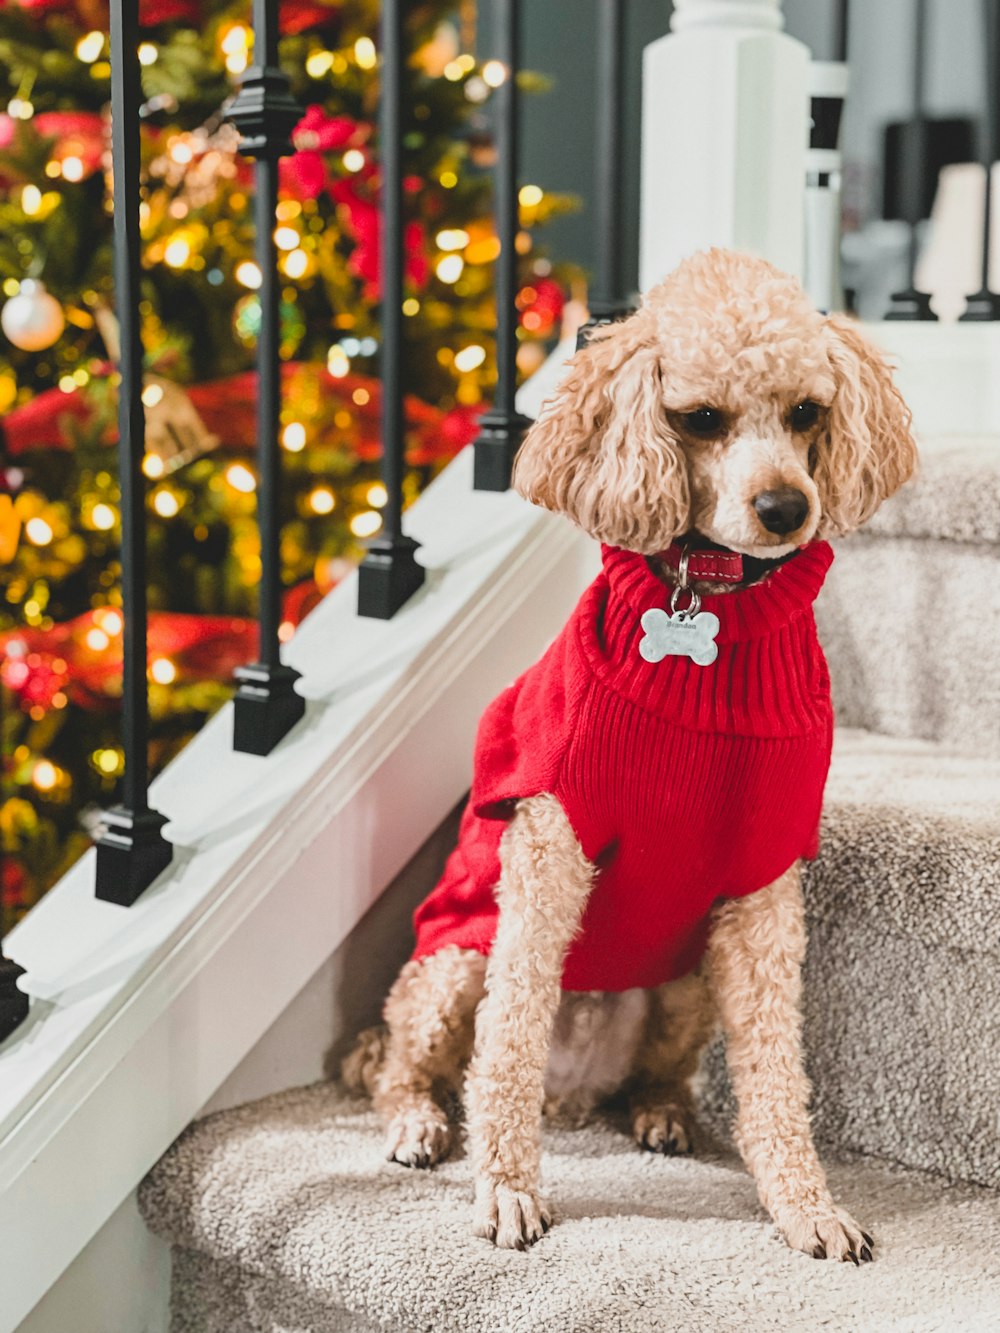 a poodle wearing a red sweater sitting on the stairs